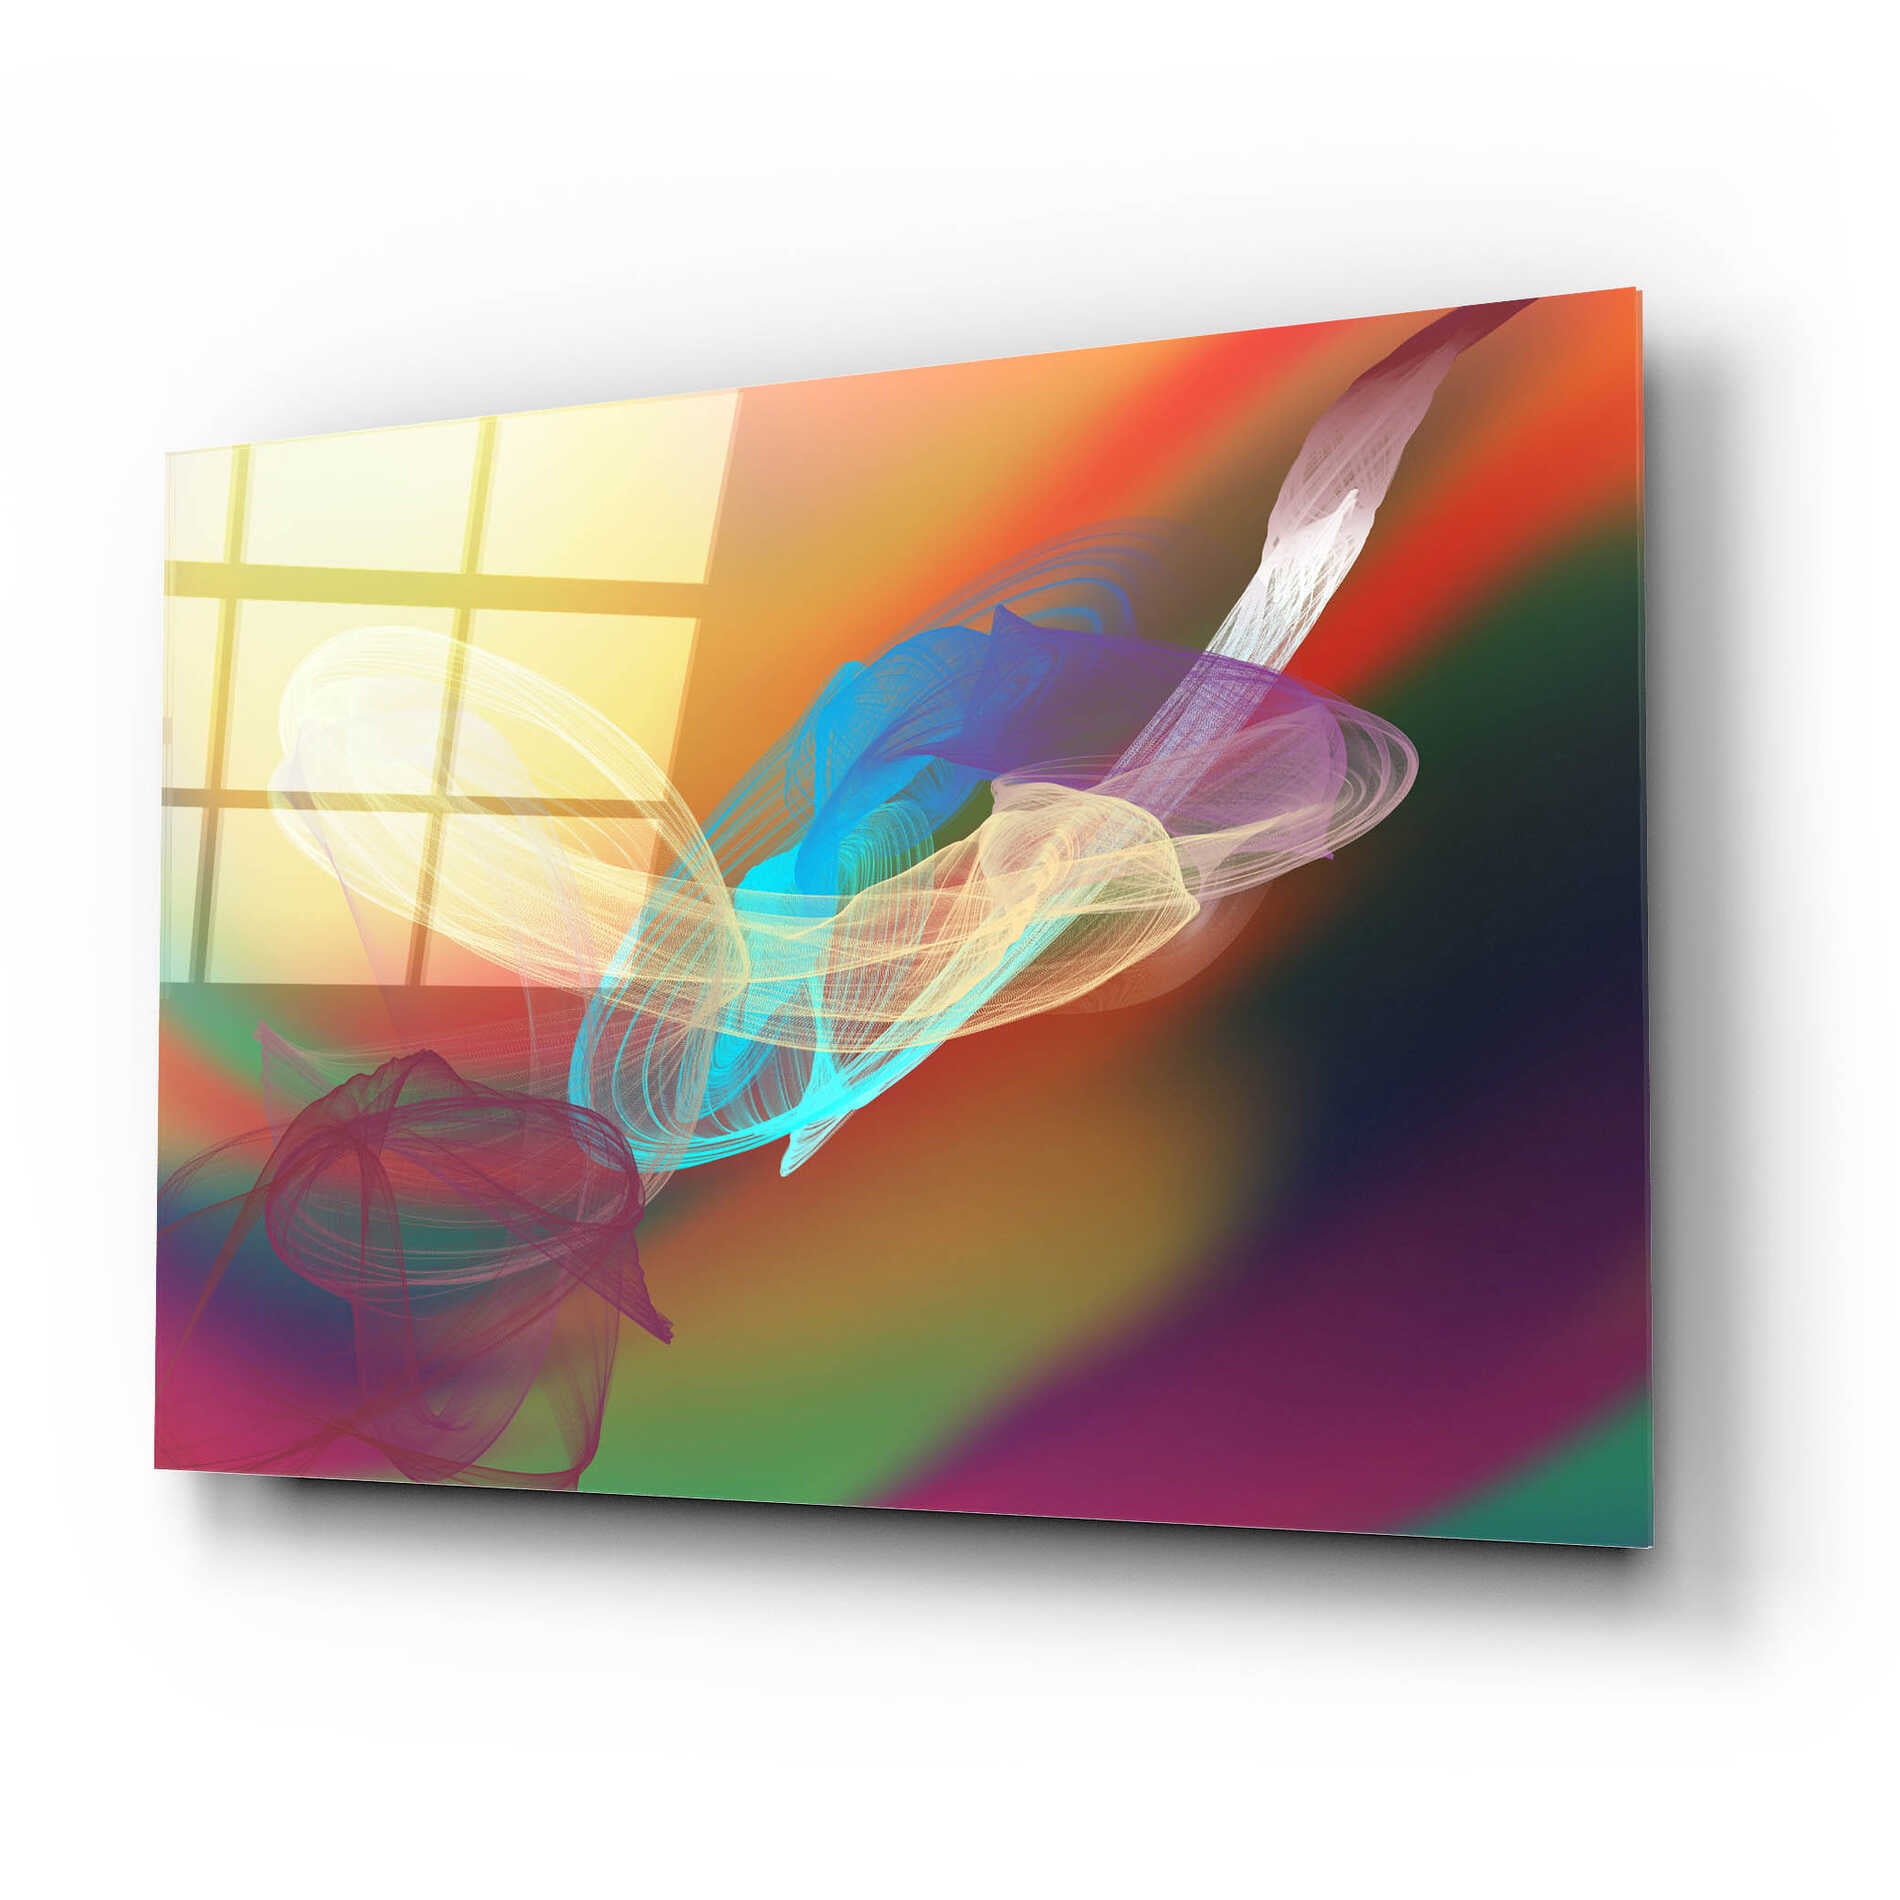 Epic Art 'Inverted Color In The Lines 6' by Irena Orlov Acrylic Glass Wall Art,24x16